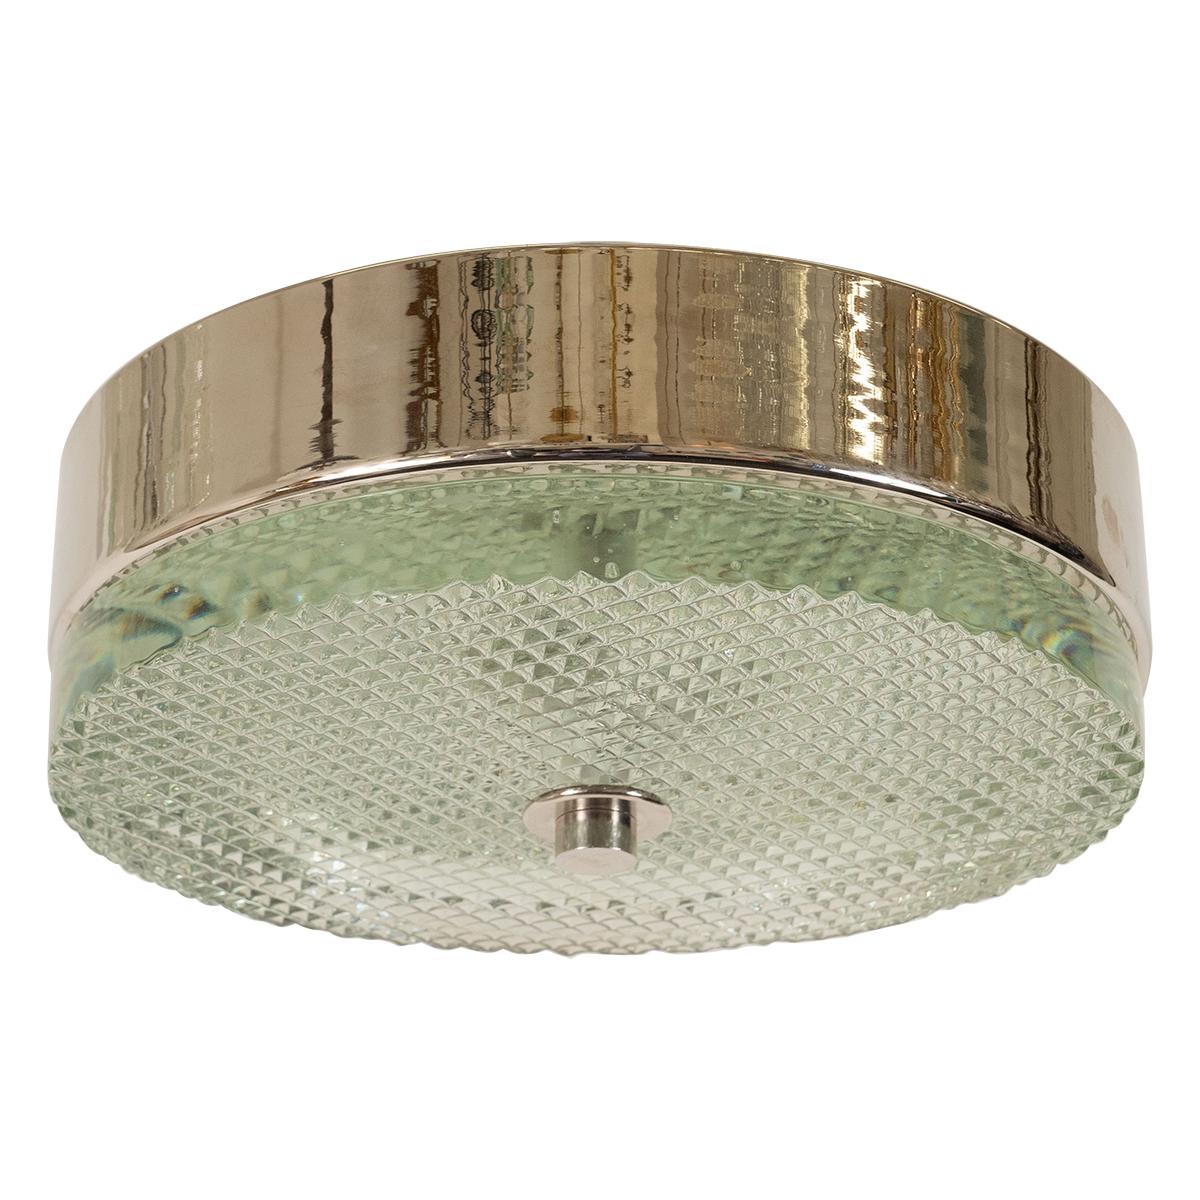 Round nickel flush mount fixture with faceted glass conforming shade.